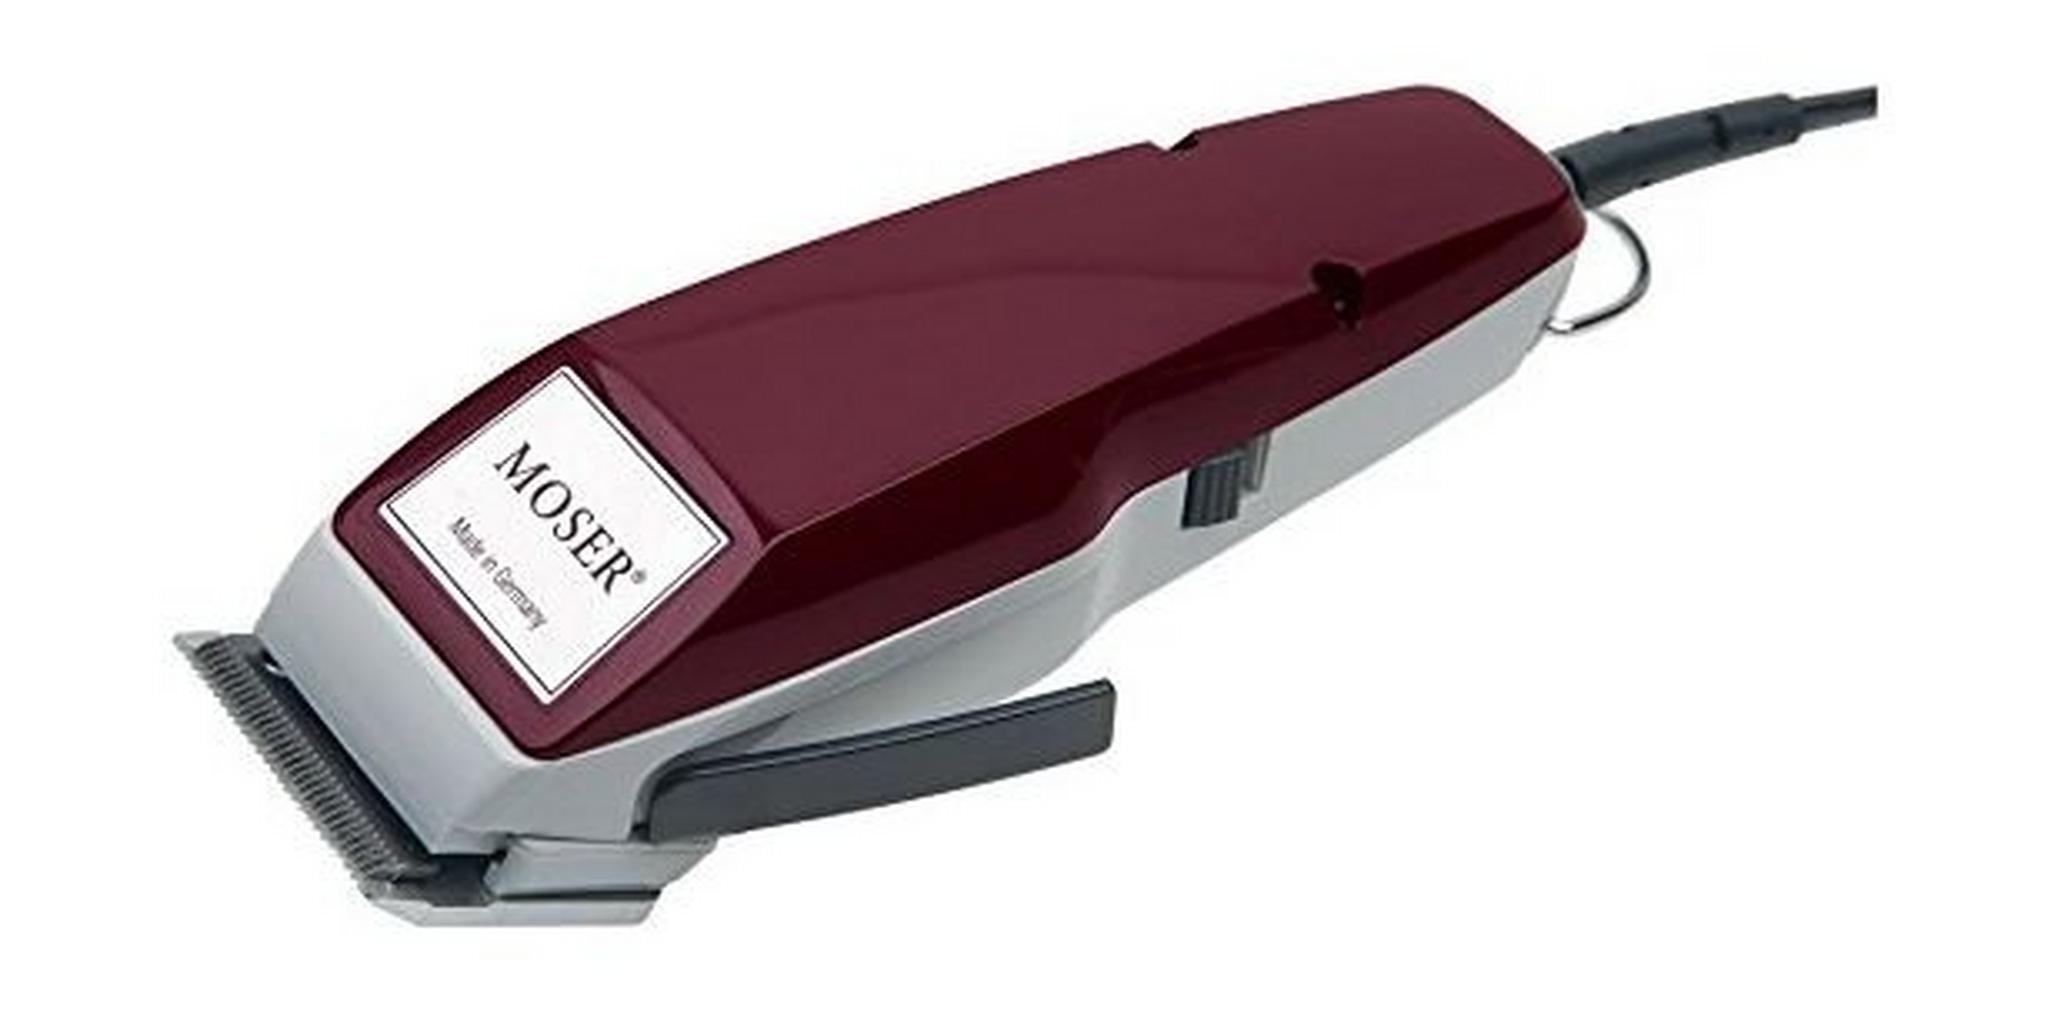 Moser 1400-0050 Classic Professional Hair Clipper & Trimmer